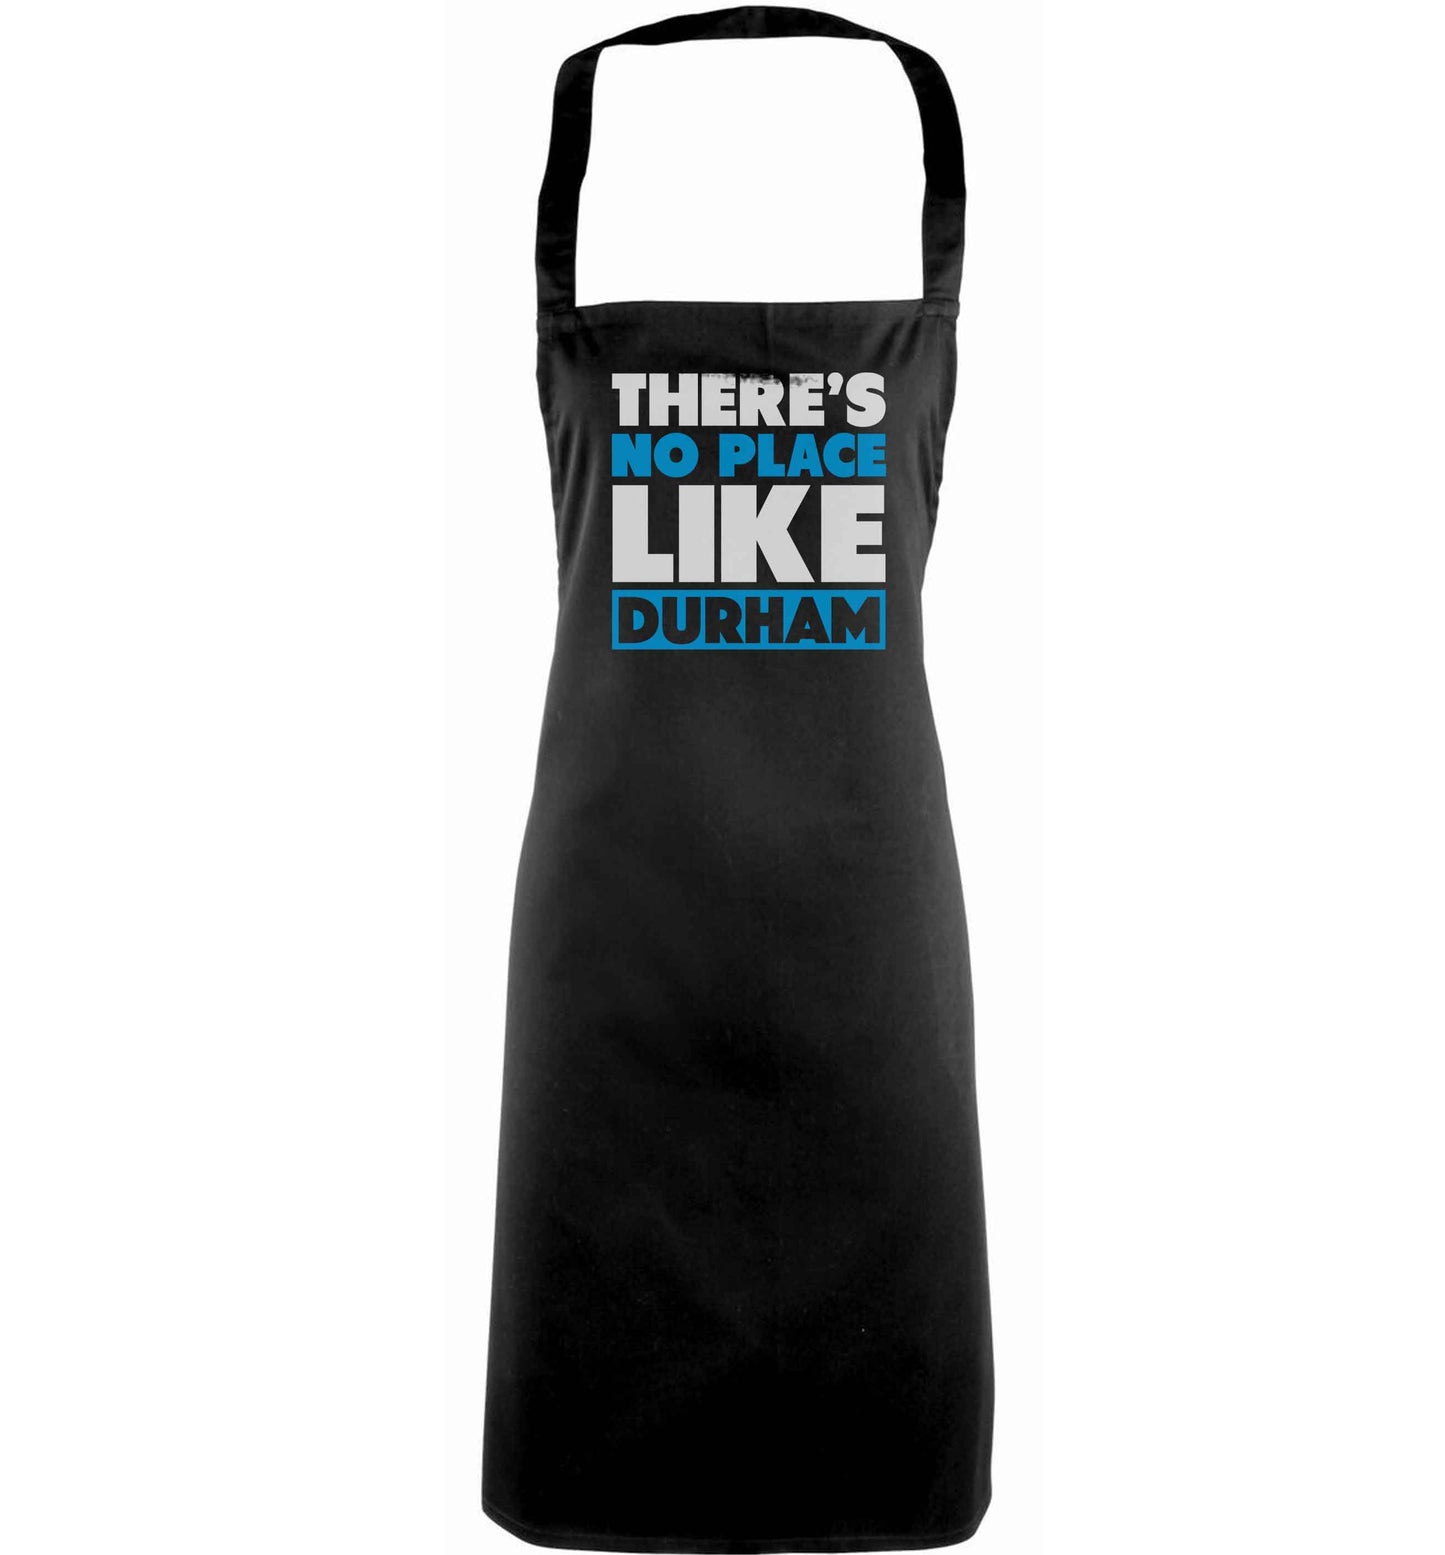 There's no place like Durham adults black apron